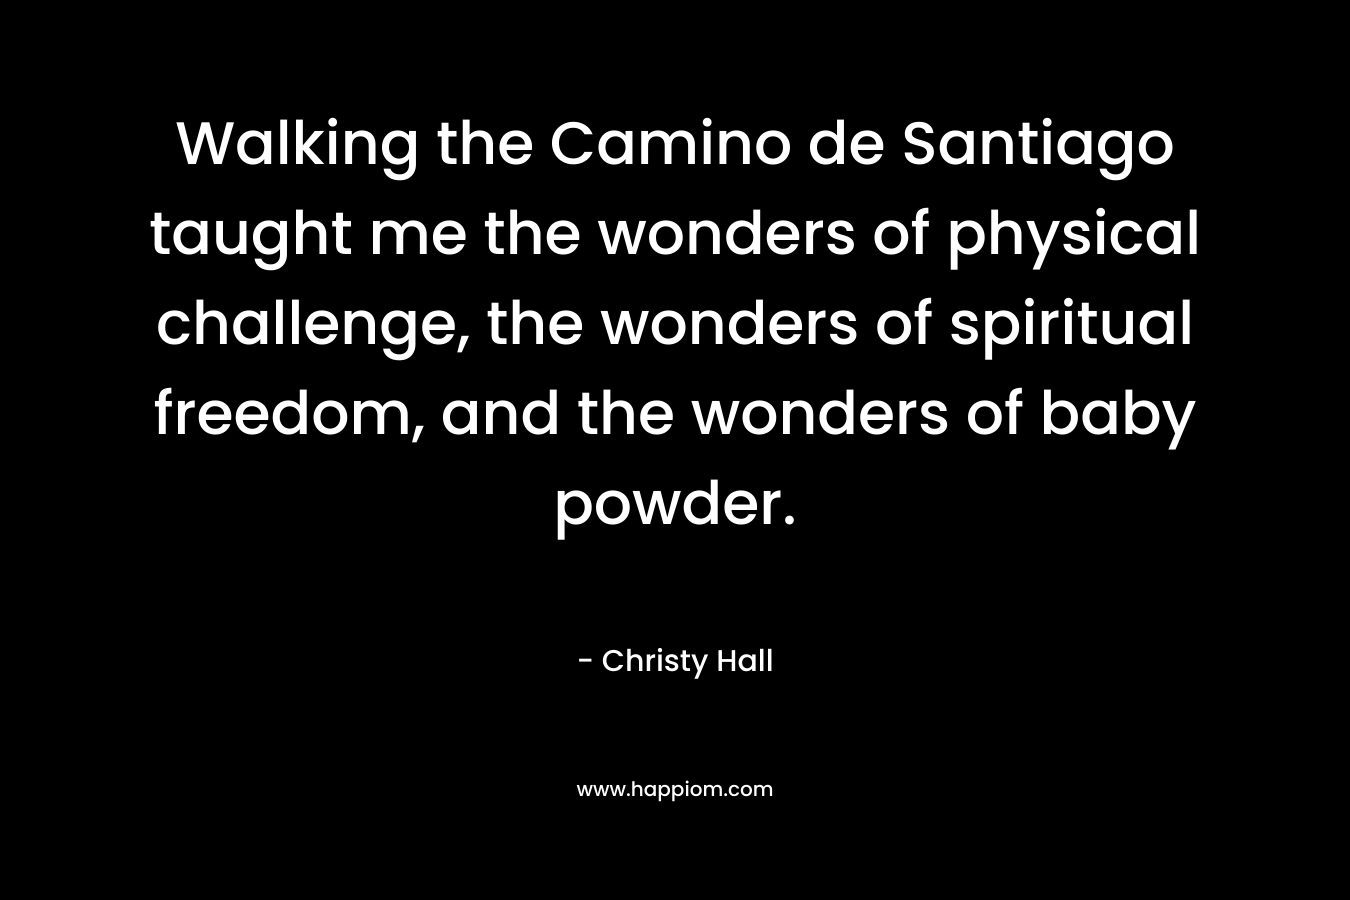 Walking the Camino de Santiago taught me the wonders of physical challenge, the wonders of spiritual freedom, and the wonders of baby powder.